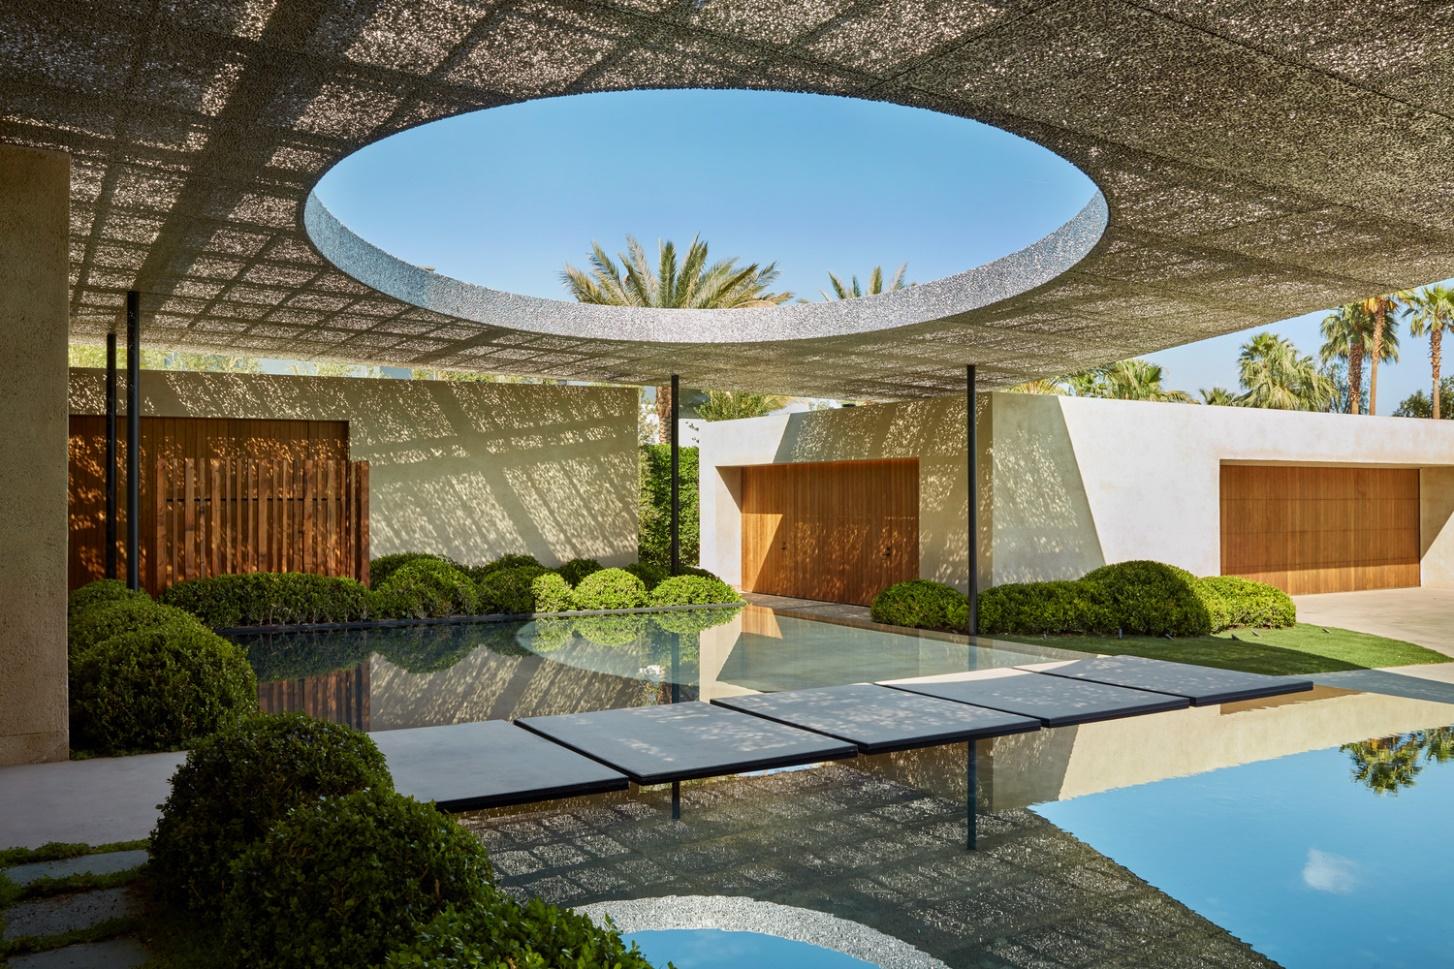 Translucent Roof Courtyard Patio Ideas